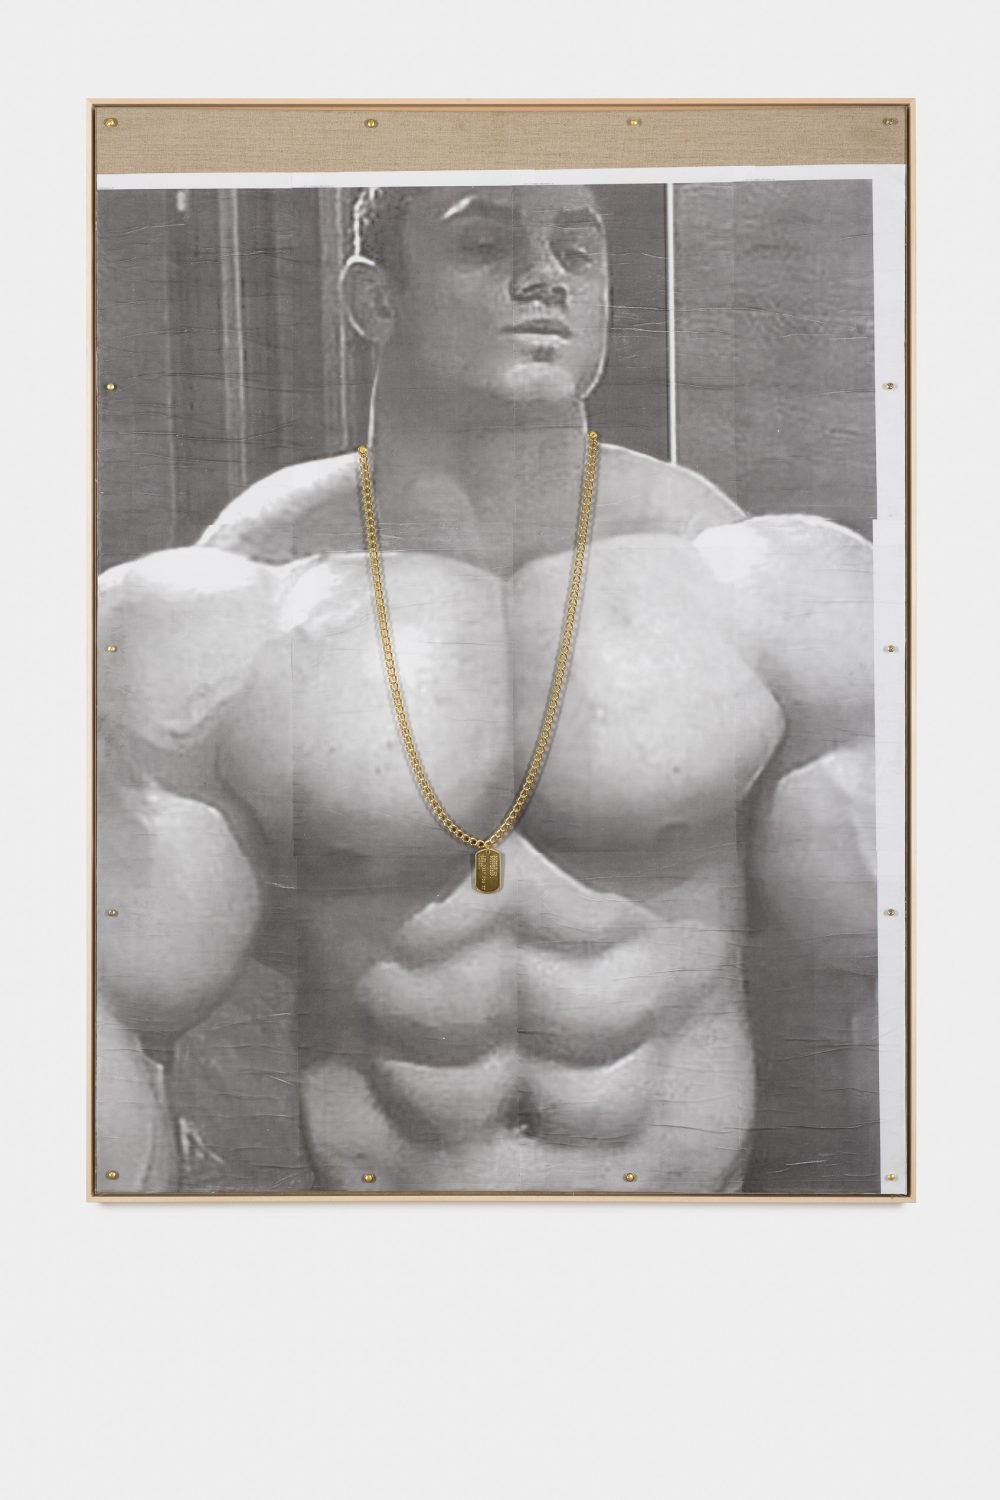 Philipp TimischlBuckle up buttercup. And pray for my money., 2018Xerox print, metal chain, embossed dog tag, acrylicglass on linen, framed120 x 90 cm